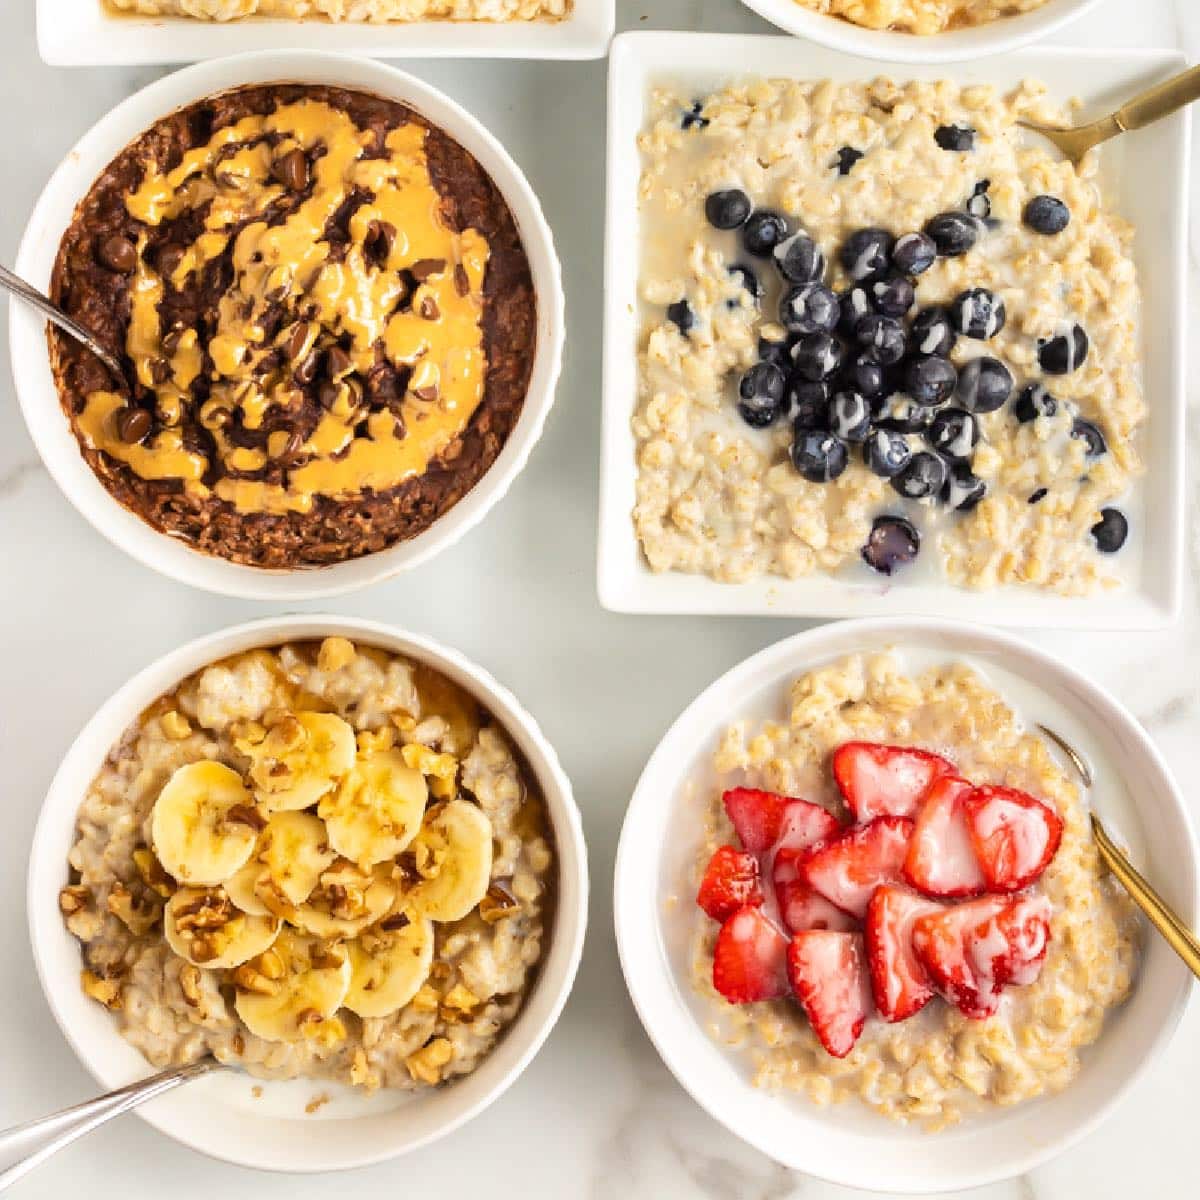 How To Meal Prep Oatmeal 8 Ways - Good Food Made Simple